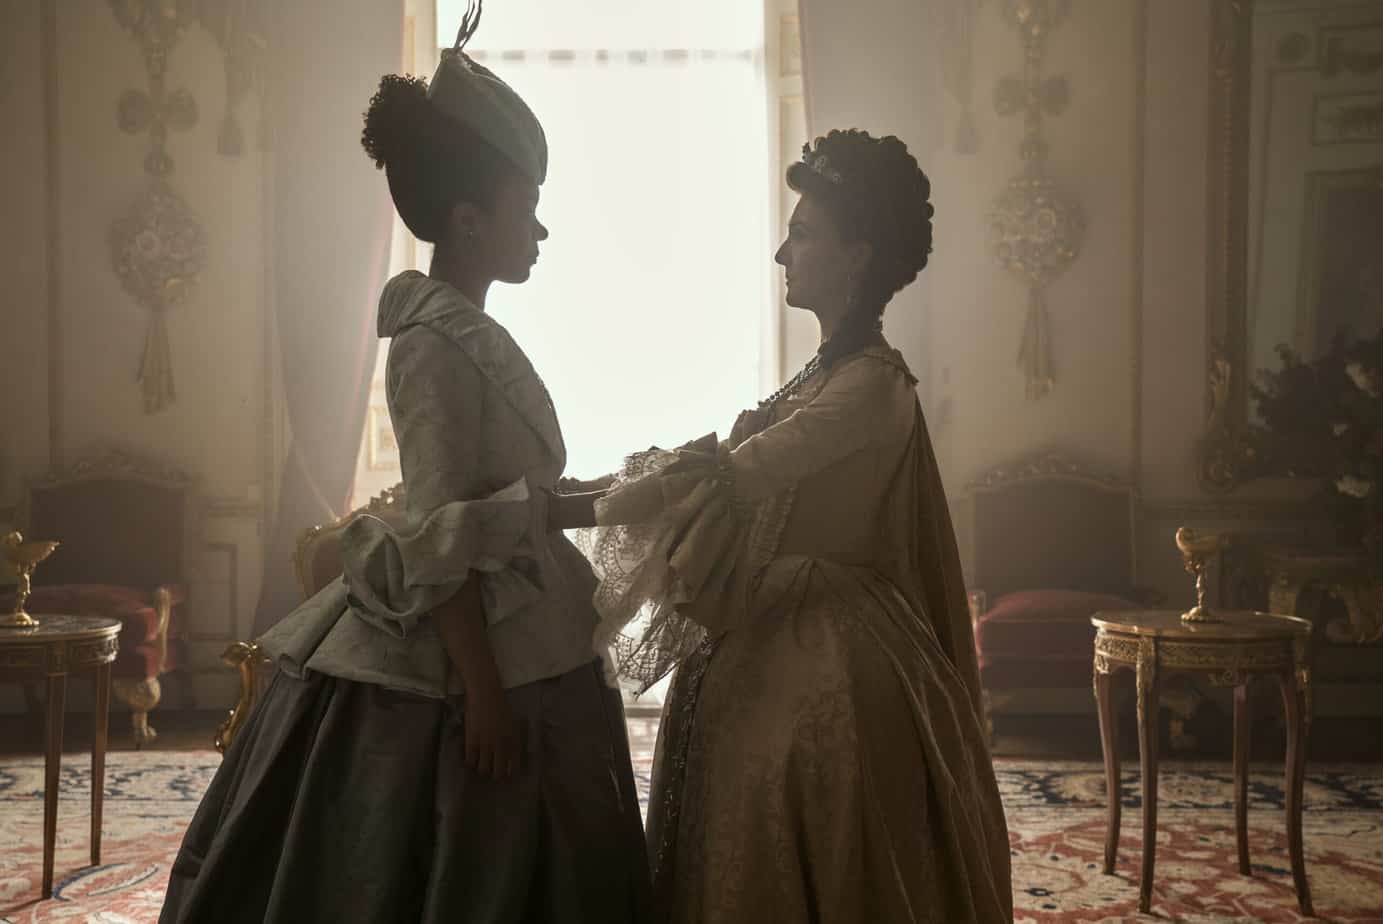 India Amarteifio as Young Queen Charlotte, Michelle Fairley as Princess Augusta in episode 101 of Queen Charlotte: A Bridgerton Story. parents guide.